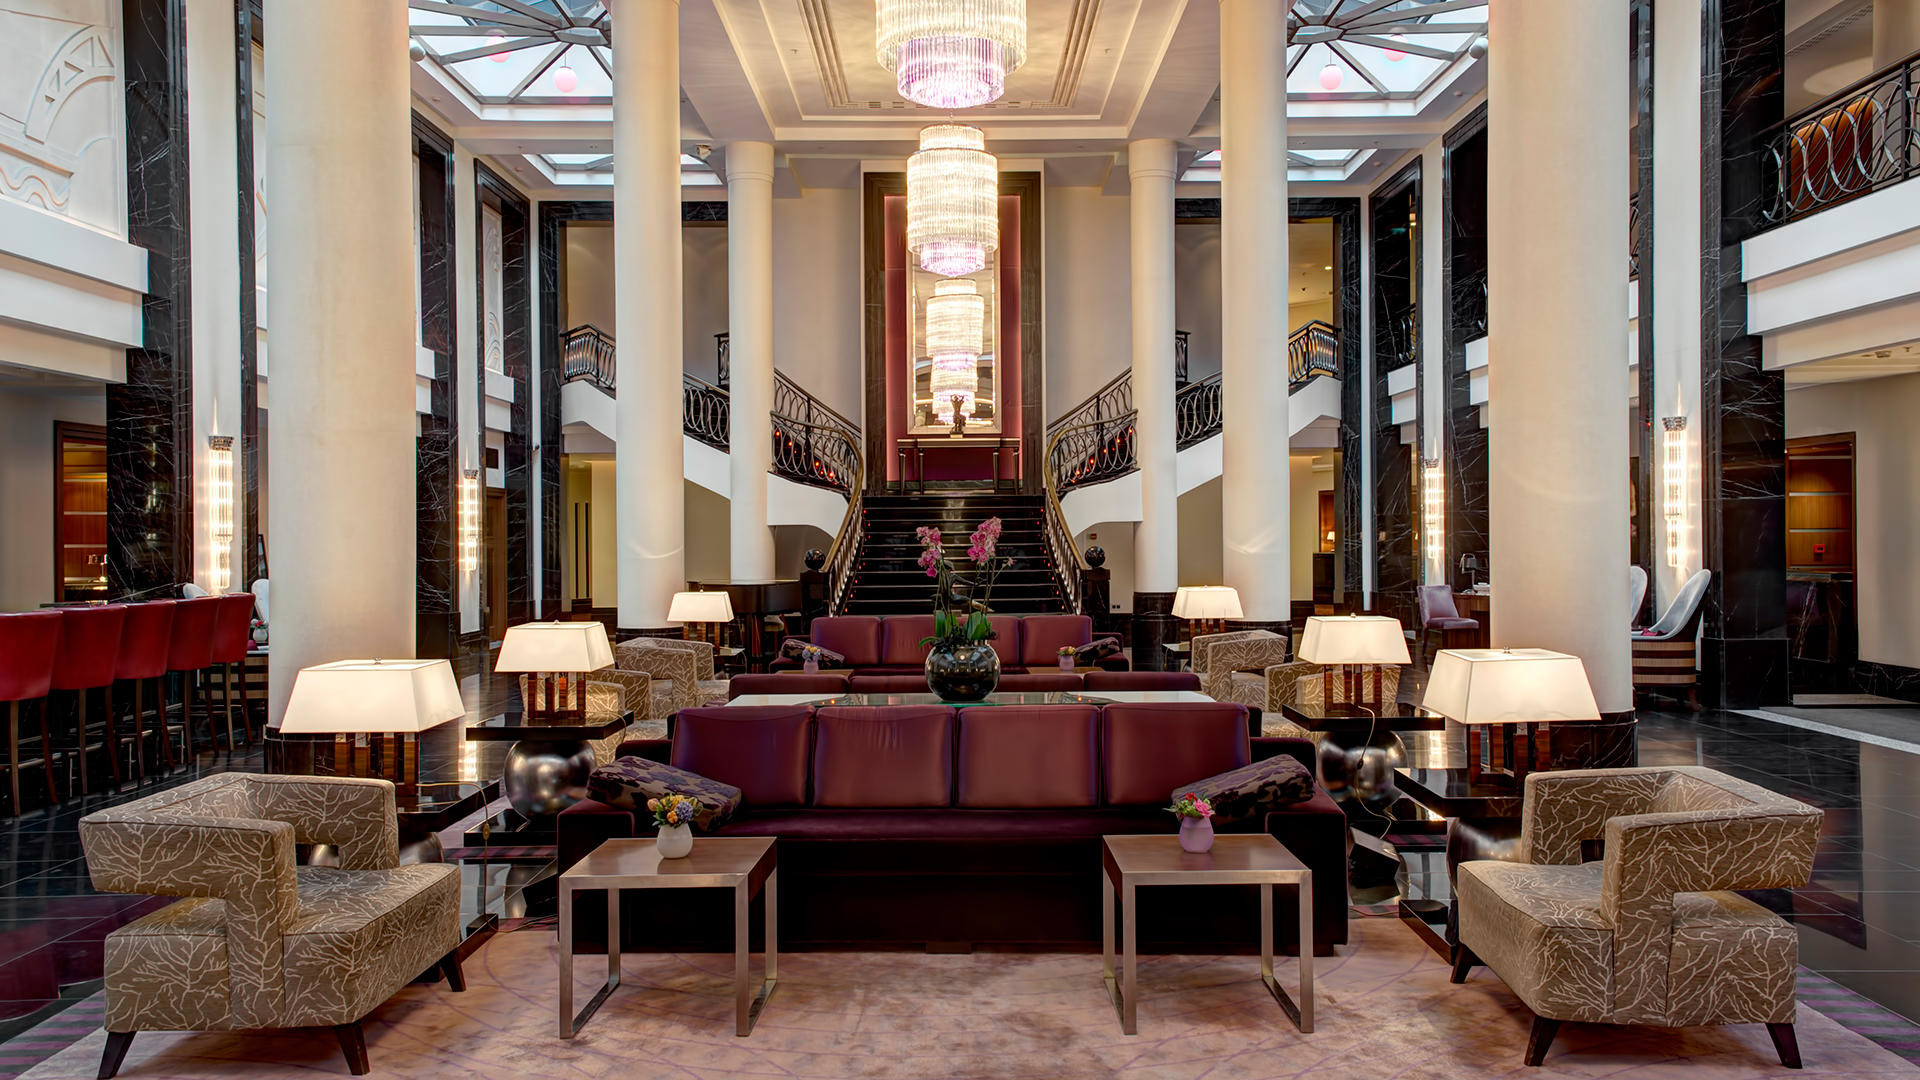 news-main-corinthia-hotels-announces-new-luxury-hotel-in-moscow.1549450207.jpg